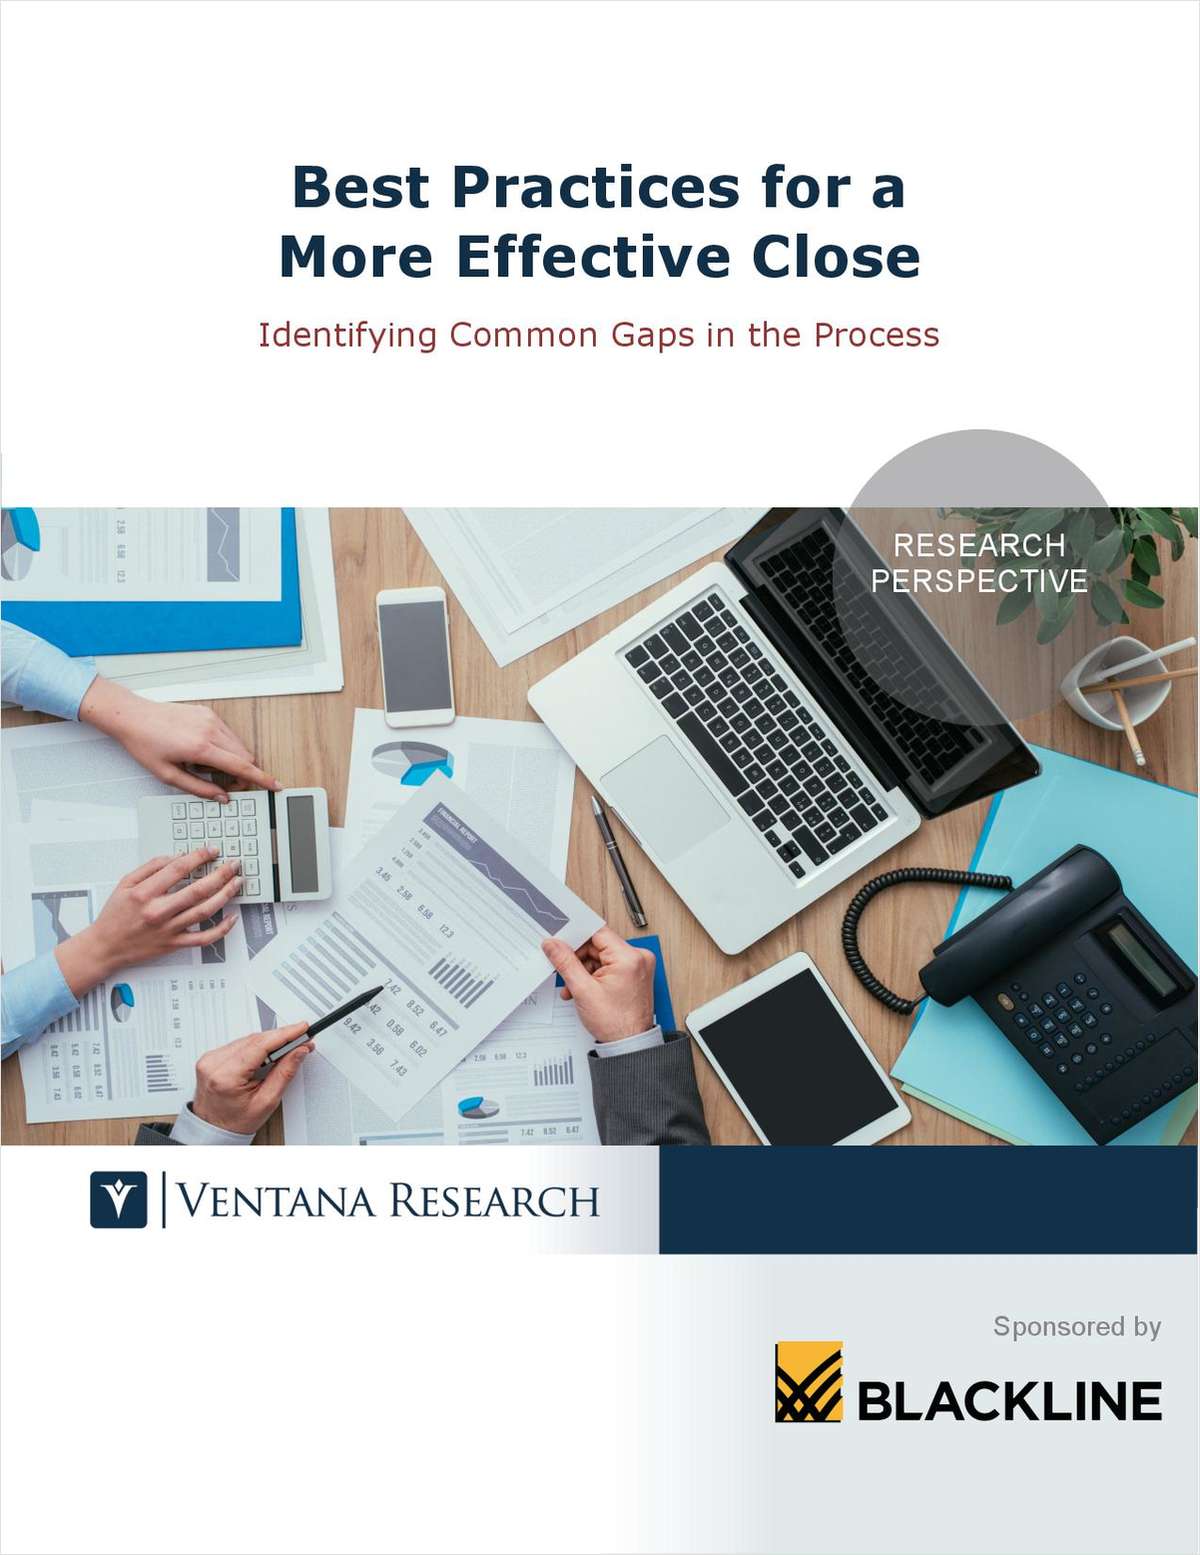 Best Practices for a More Effective Close